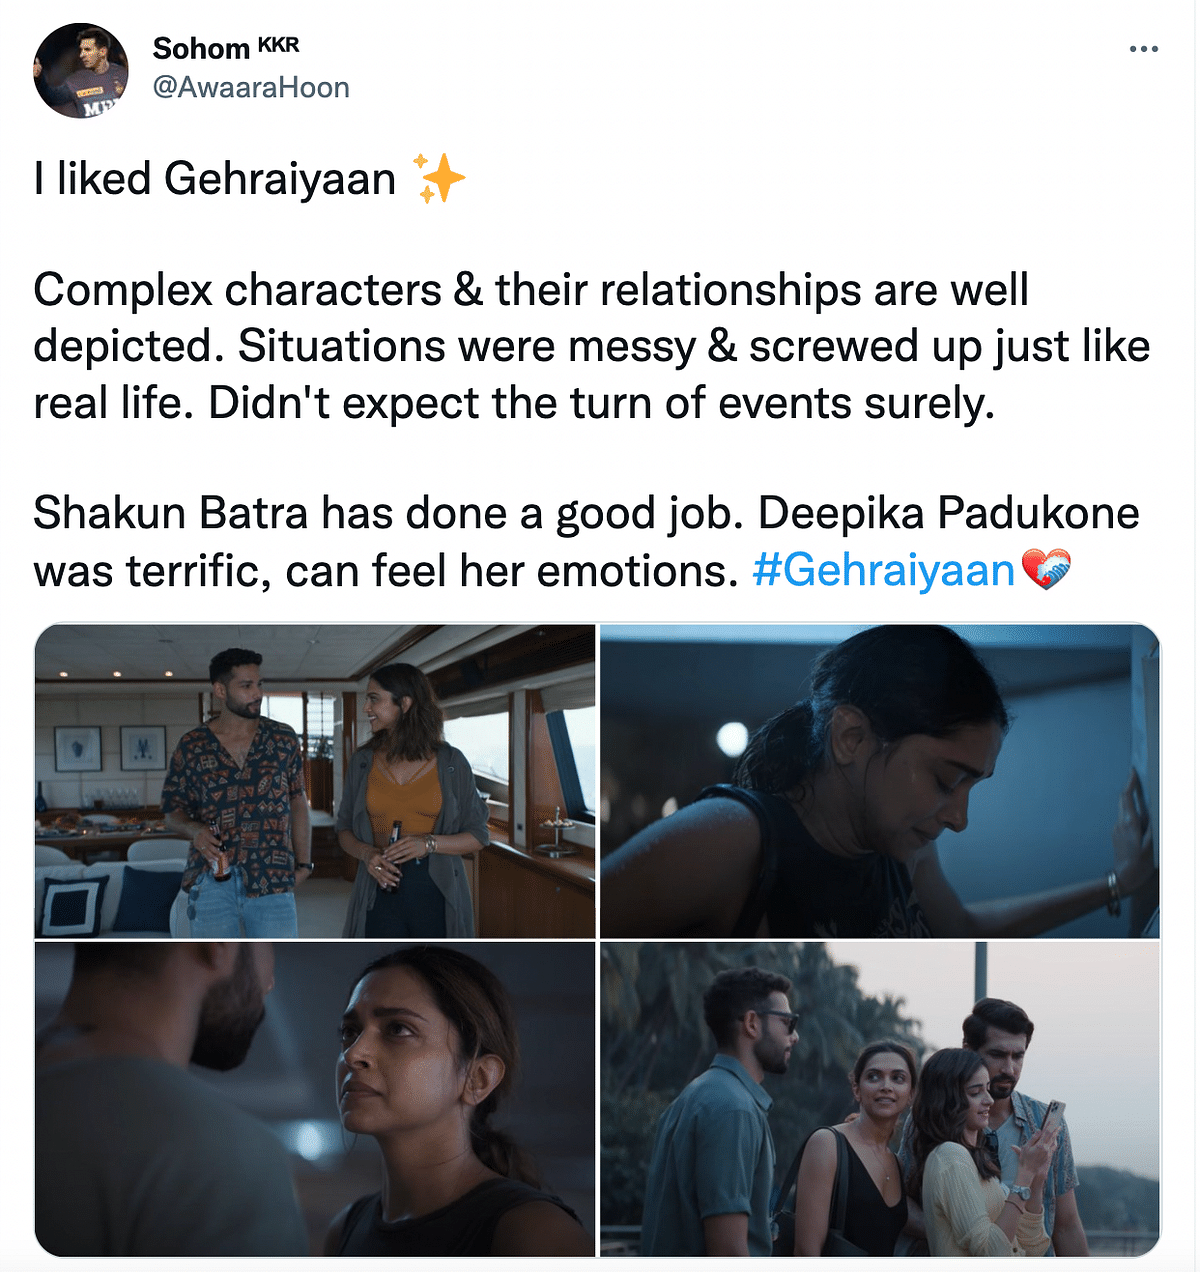 Here's what Twitter thought of Shakun Batra's 'Gehraiyaan'.